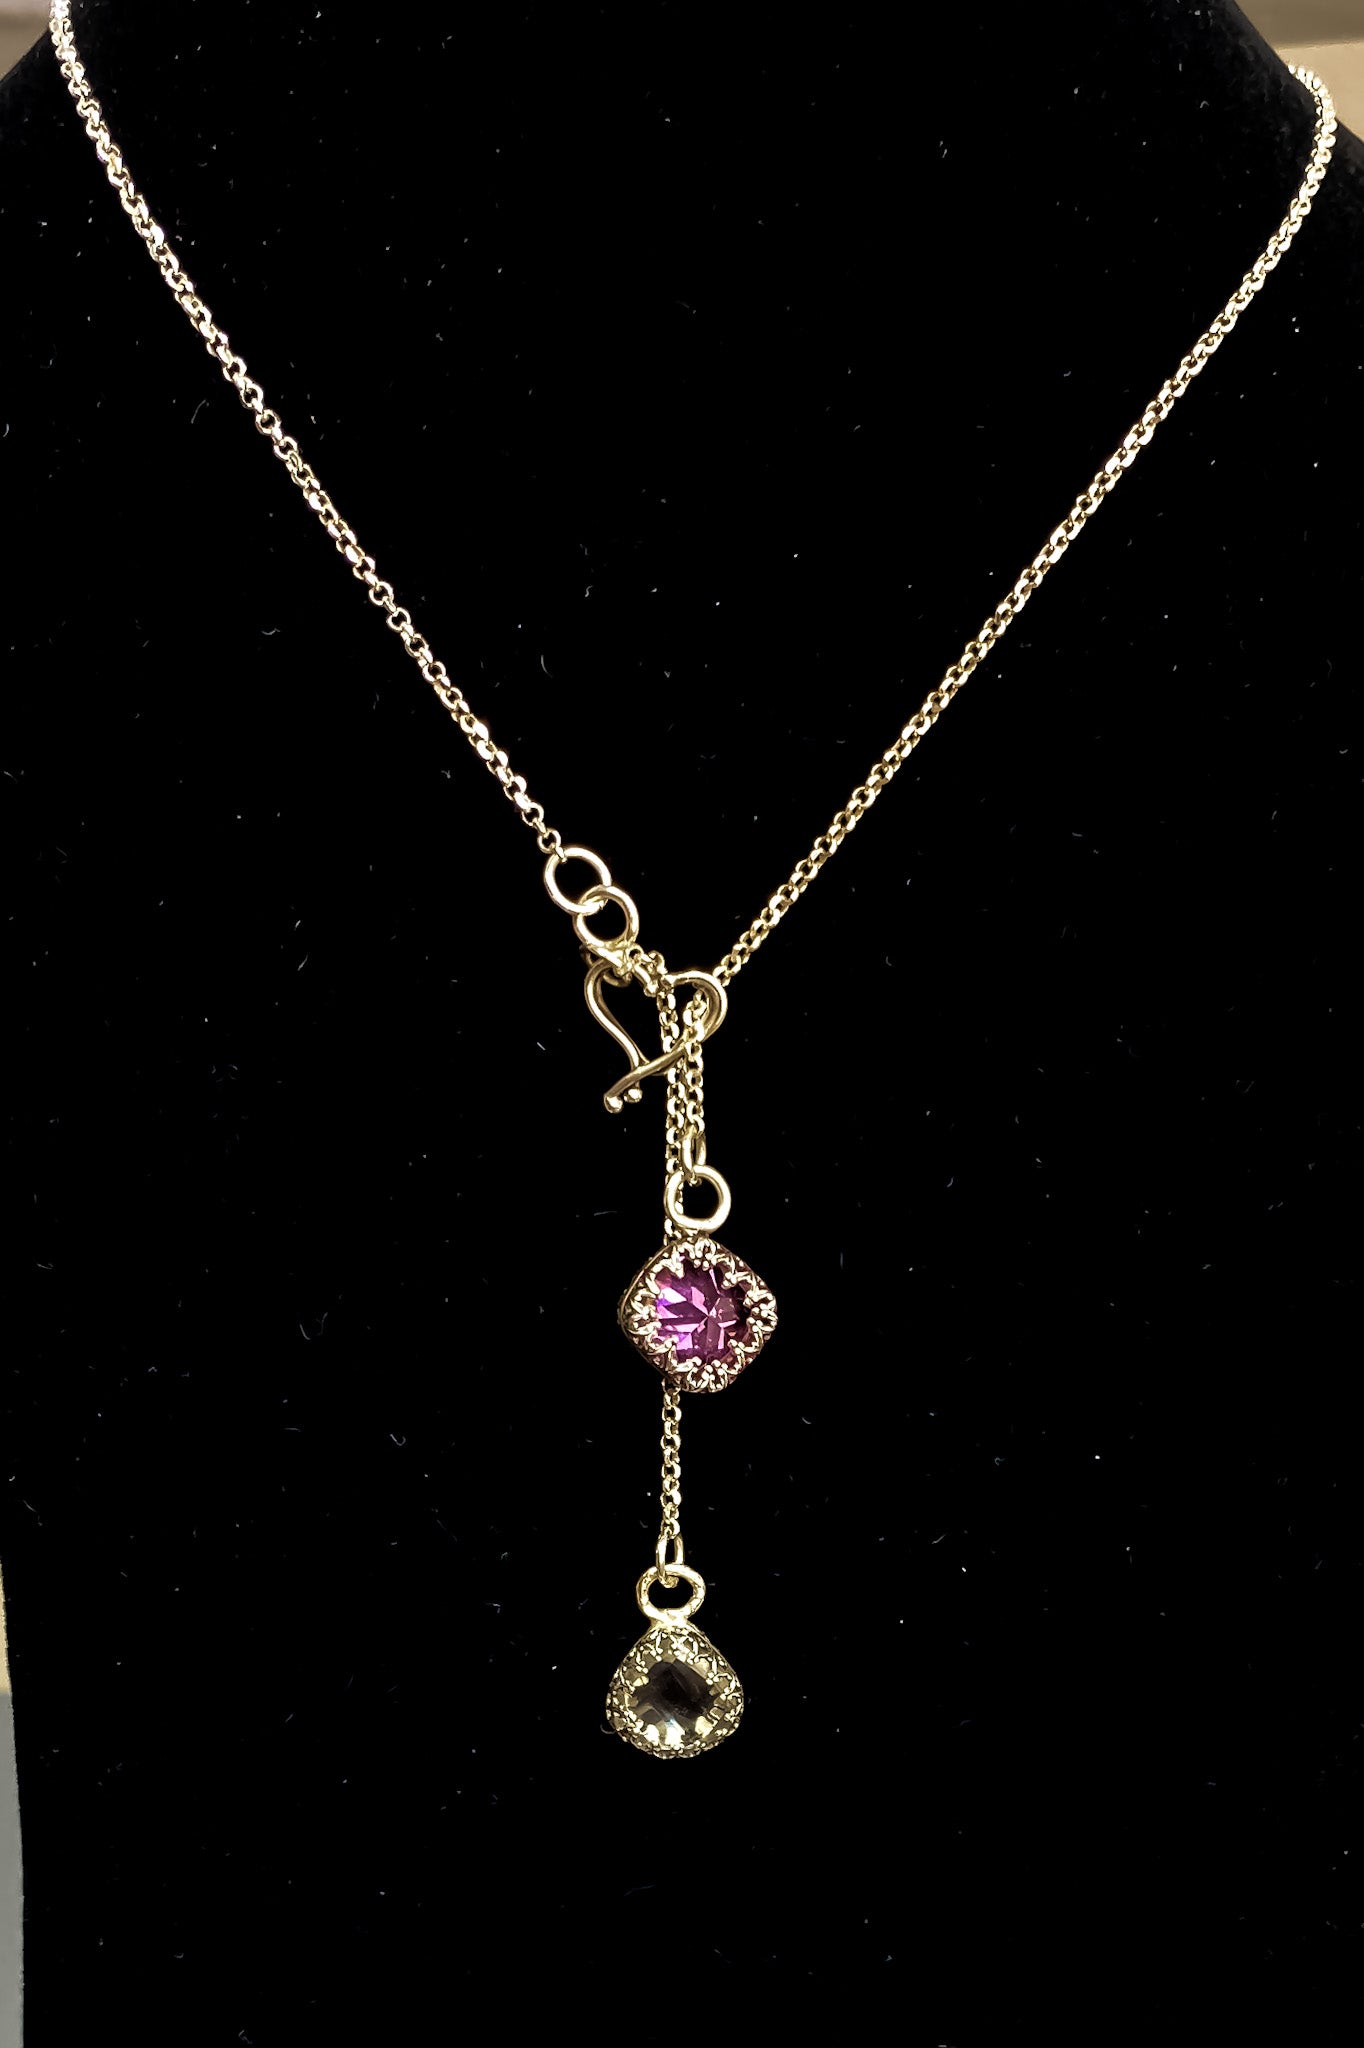 Pink Topaz and Clear Crystal Quartz Necklace